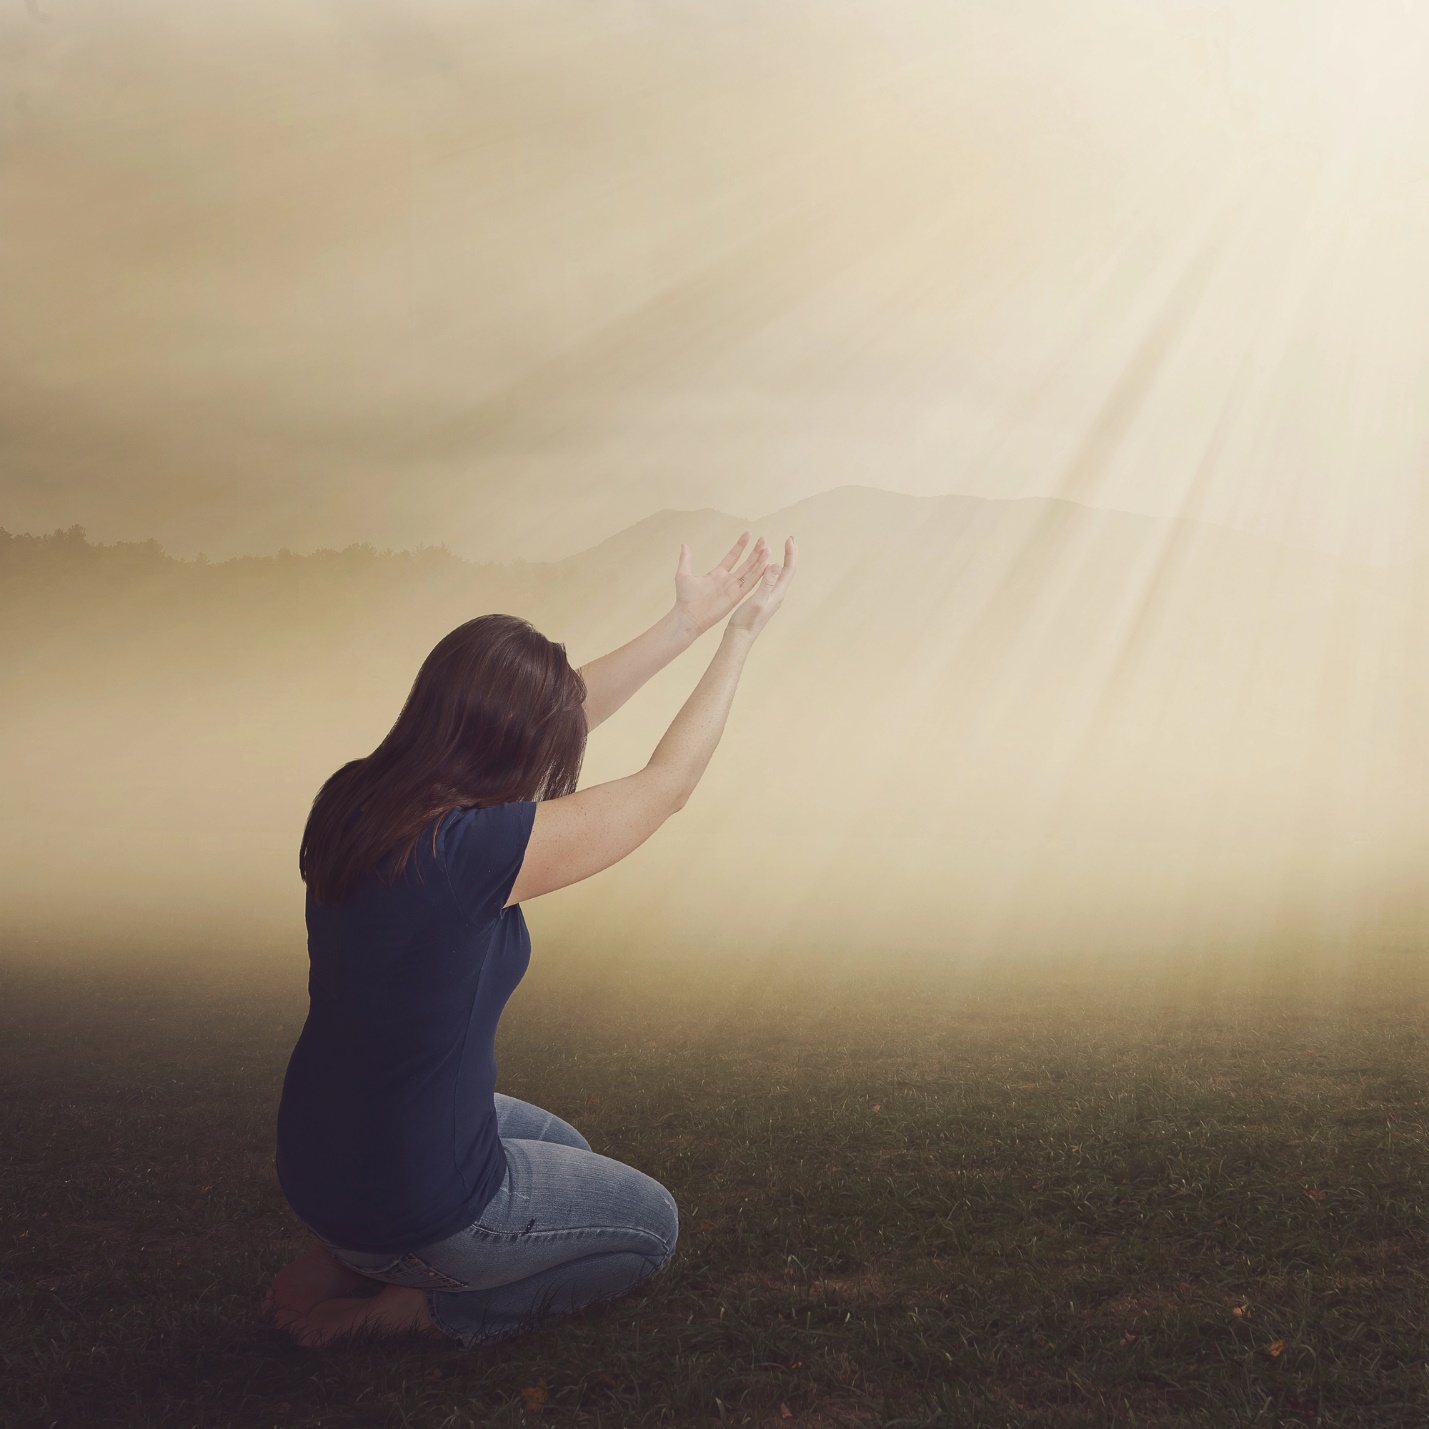 A person kneeling in the grass with her hands raised

Description automatically generated